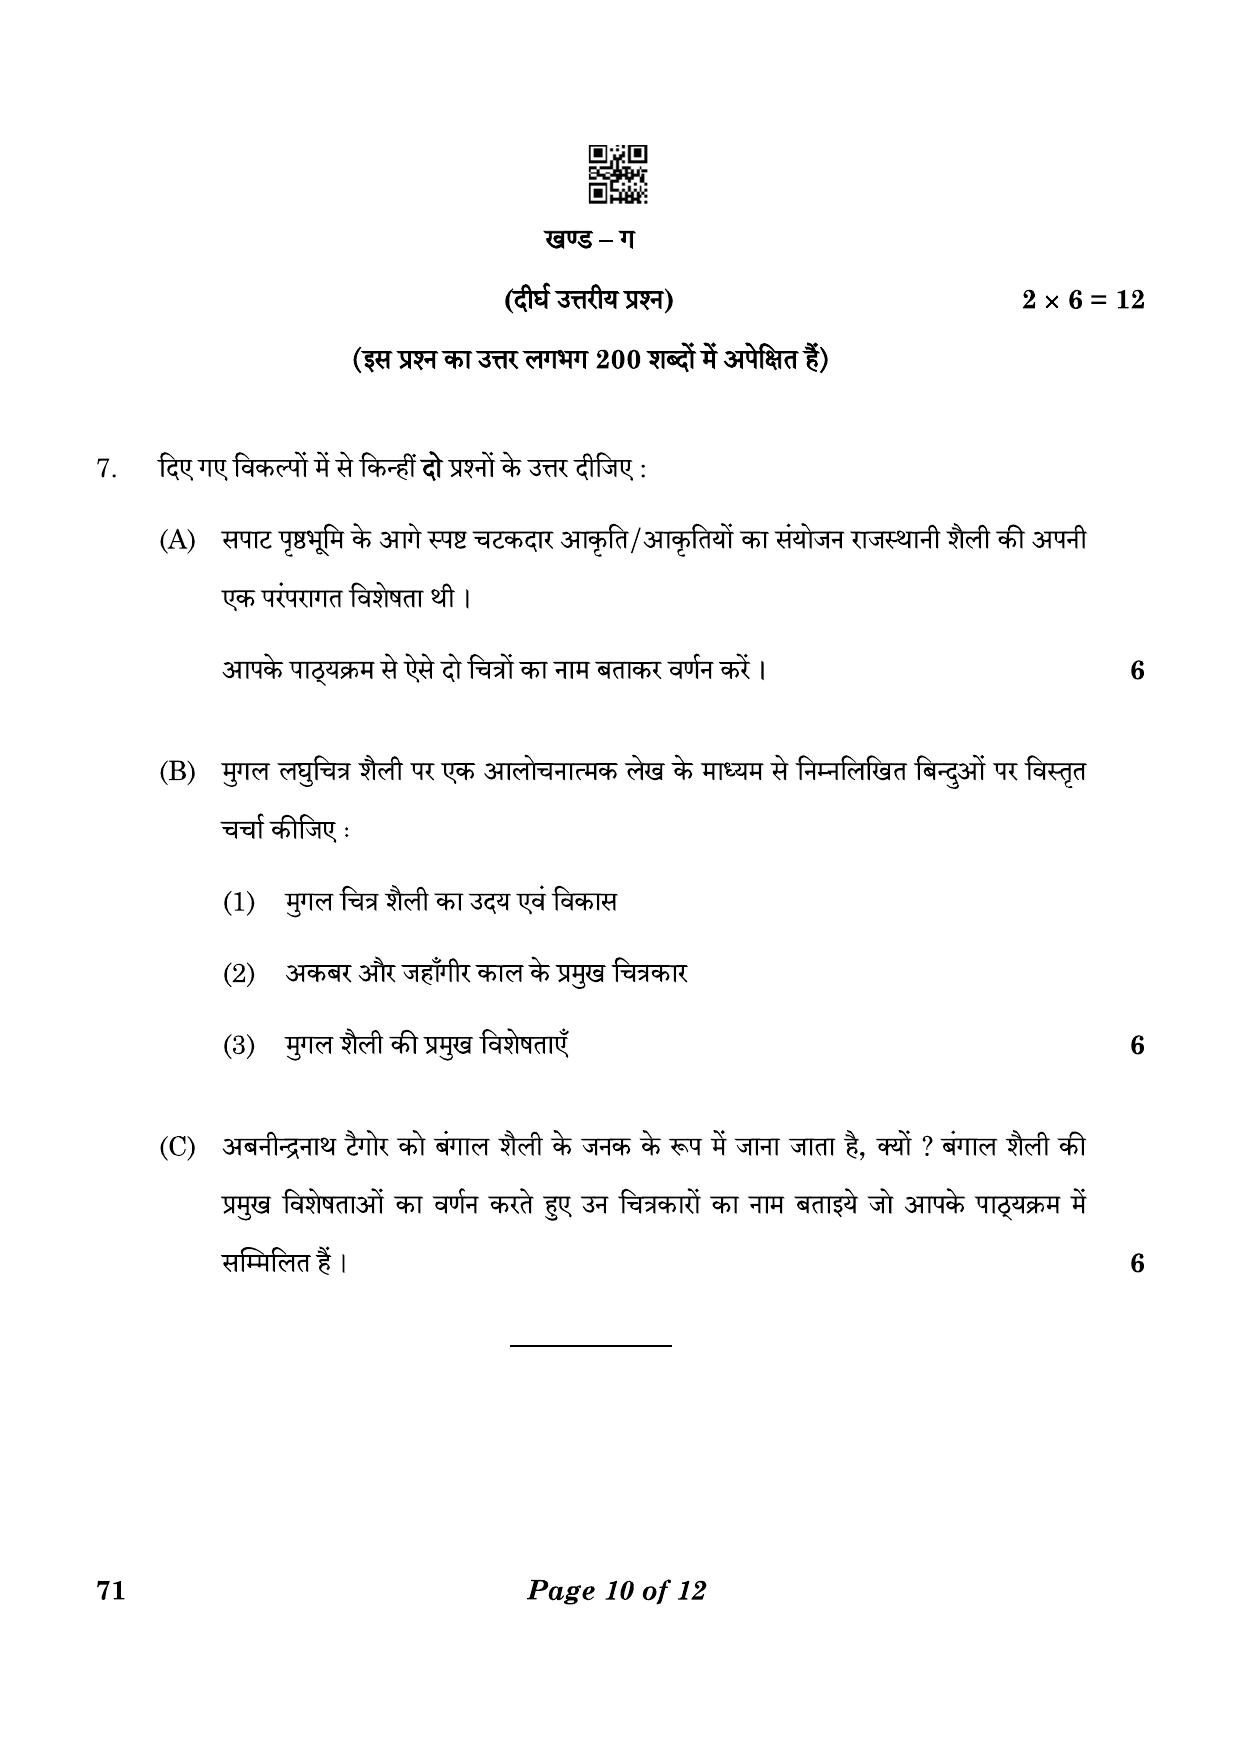 CBSE Class 12 71_Painting 2023 Question Paper - Page 10